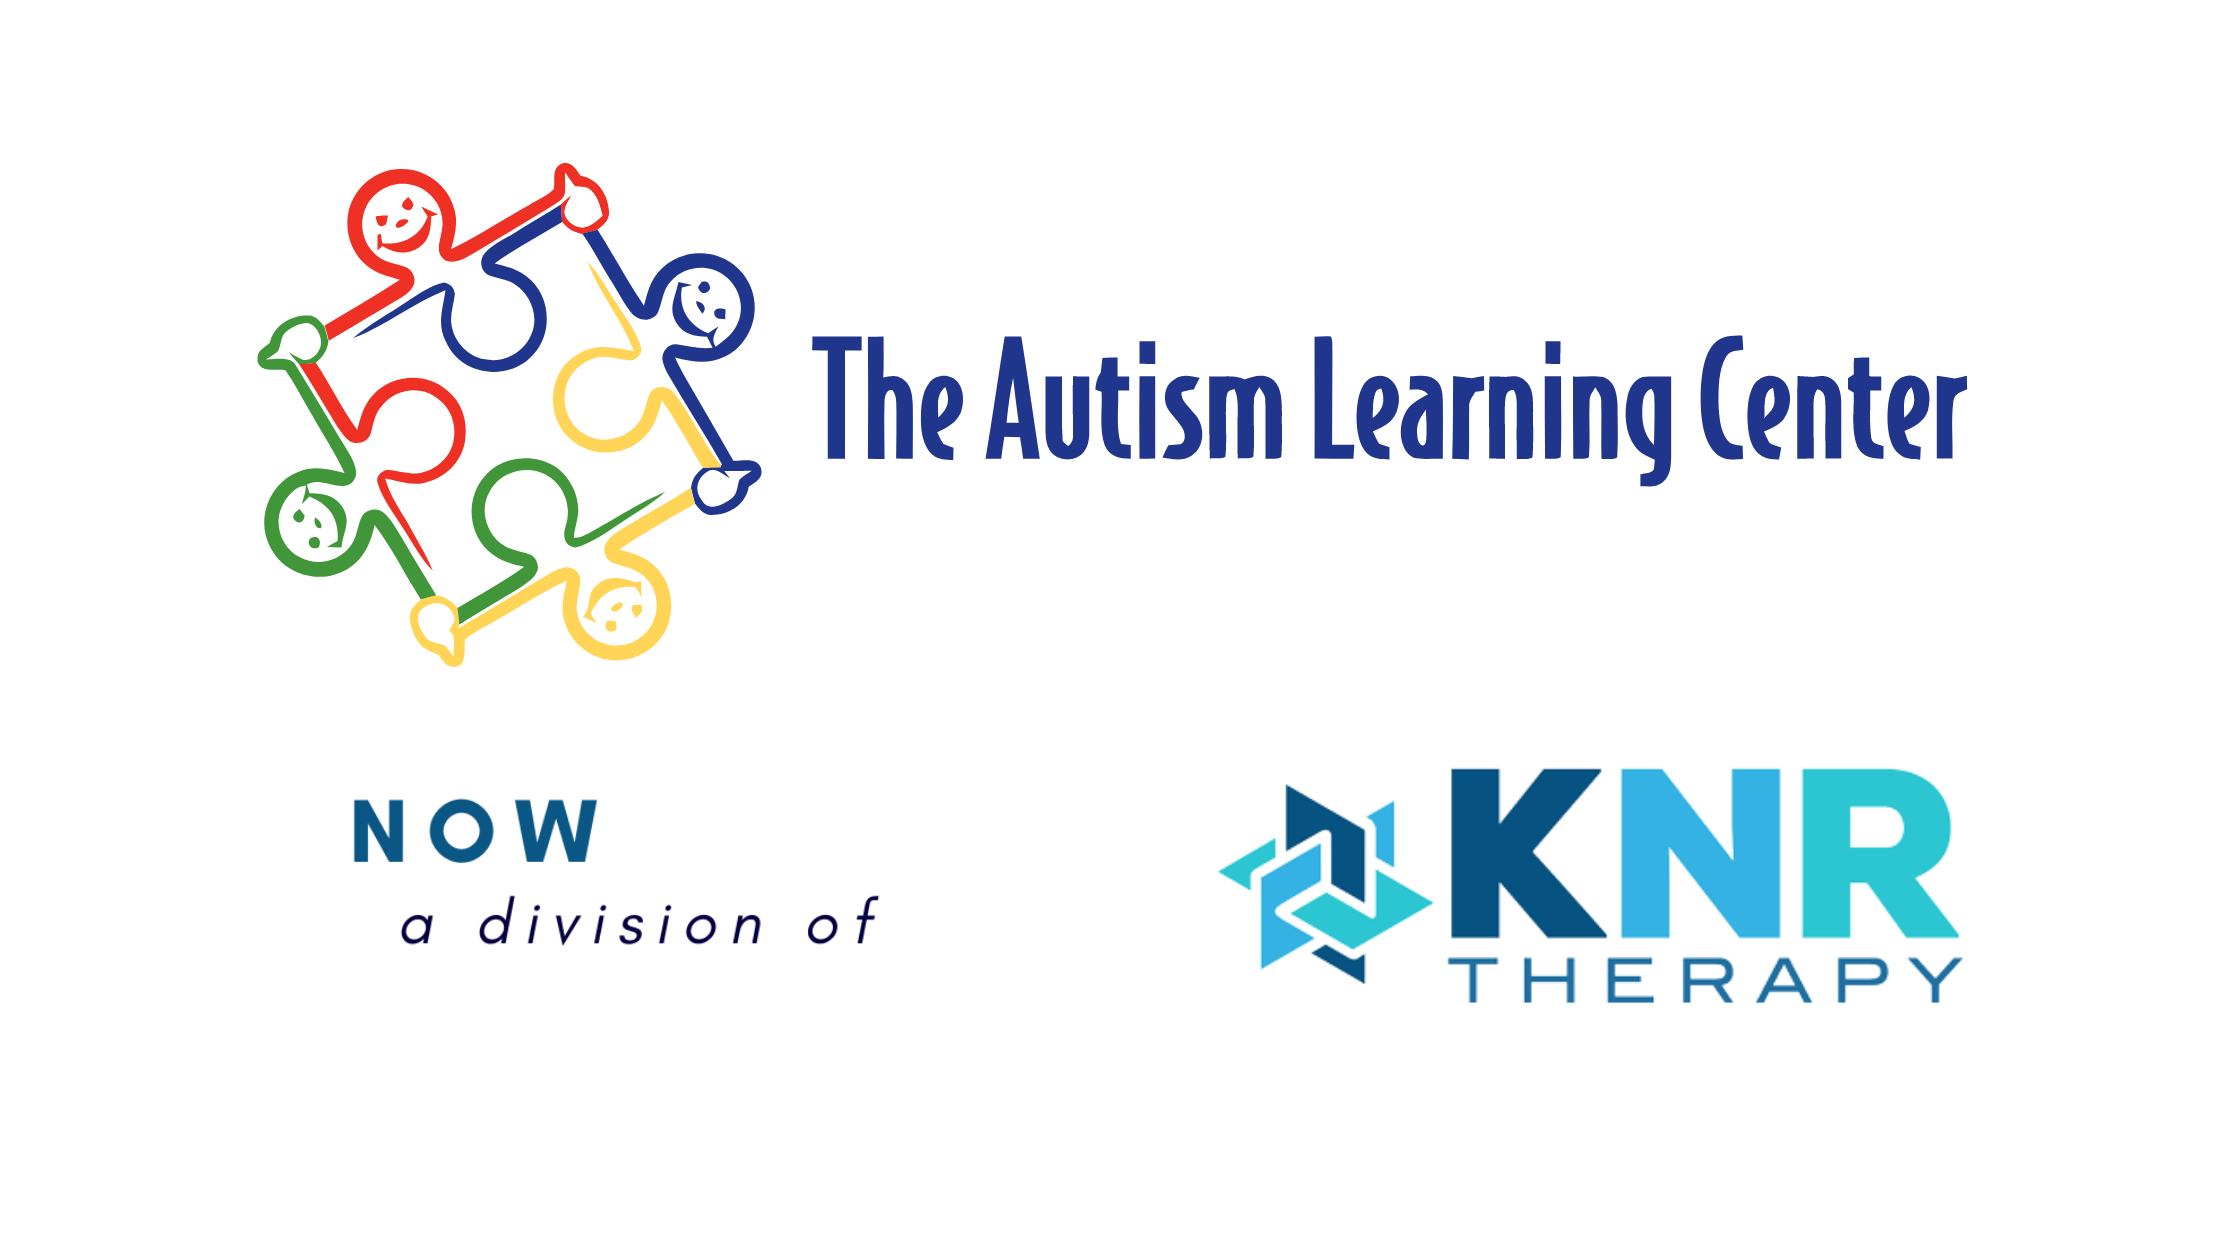 Florida-based KNR Therapy Announces Merger with Georgia-based Autism Learning Center